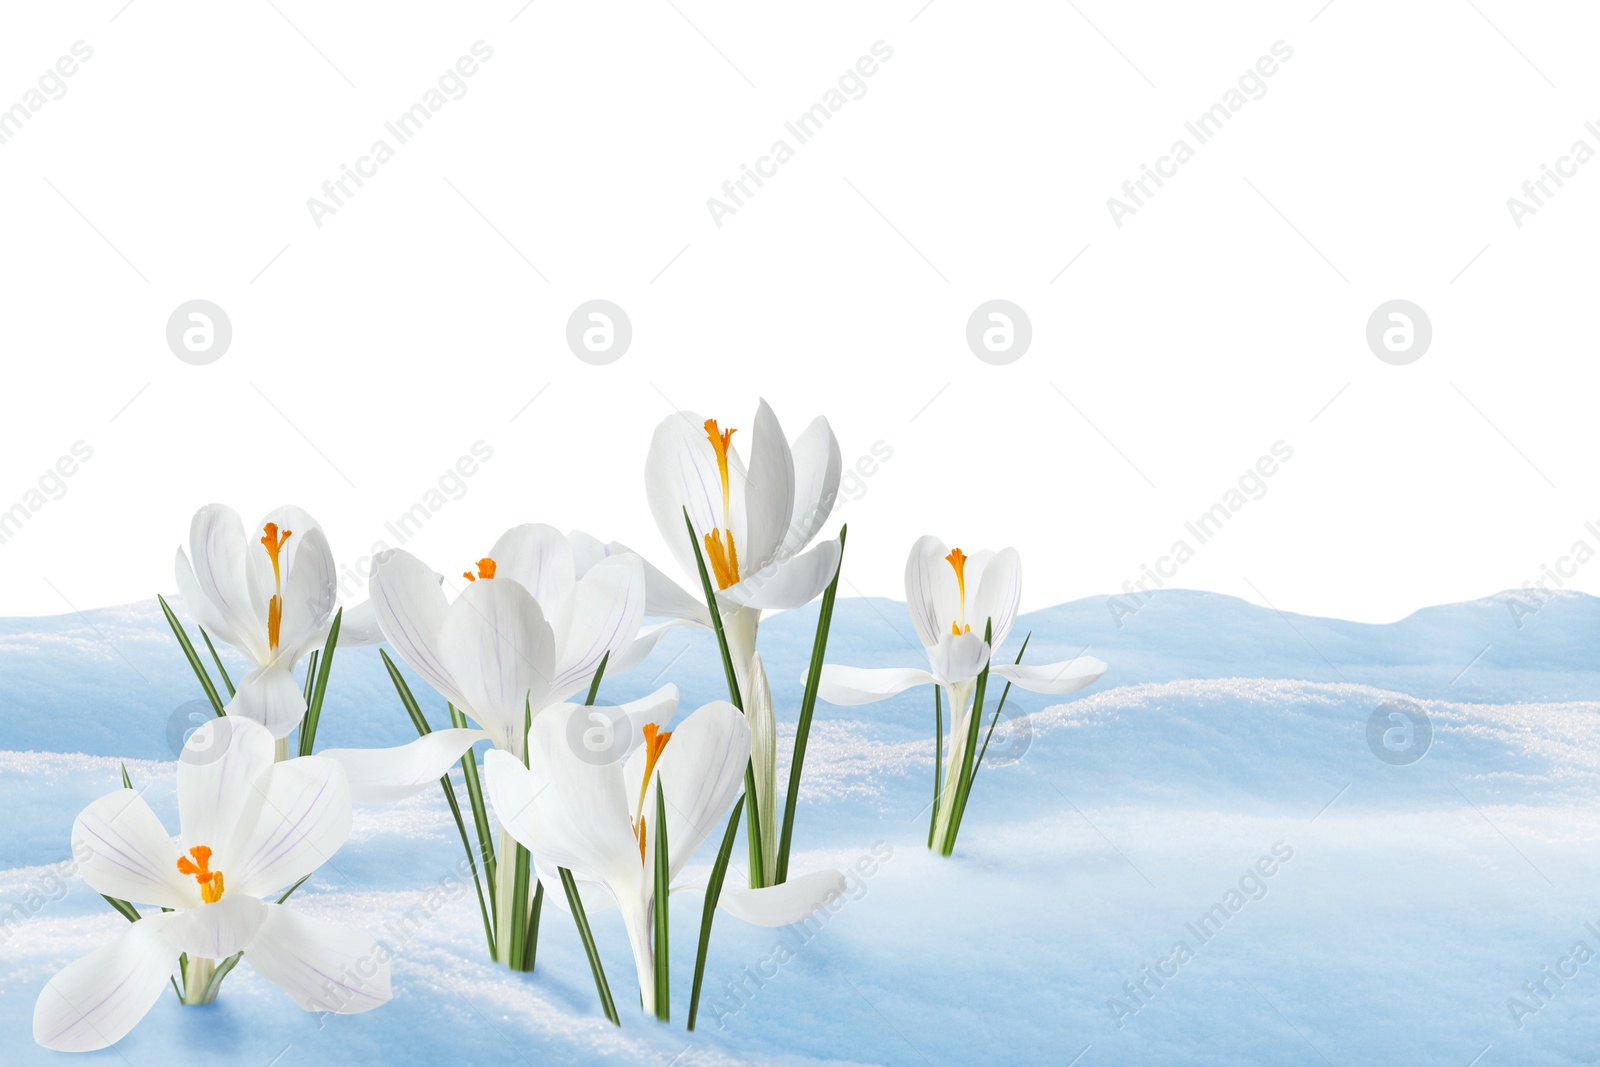 Image of Beautiful crocuses growing through snow against white background. First spring flowers